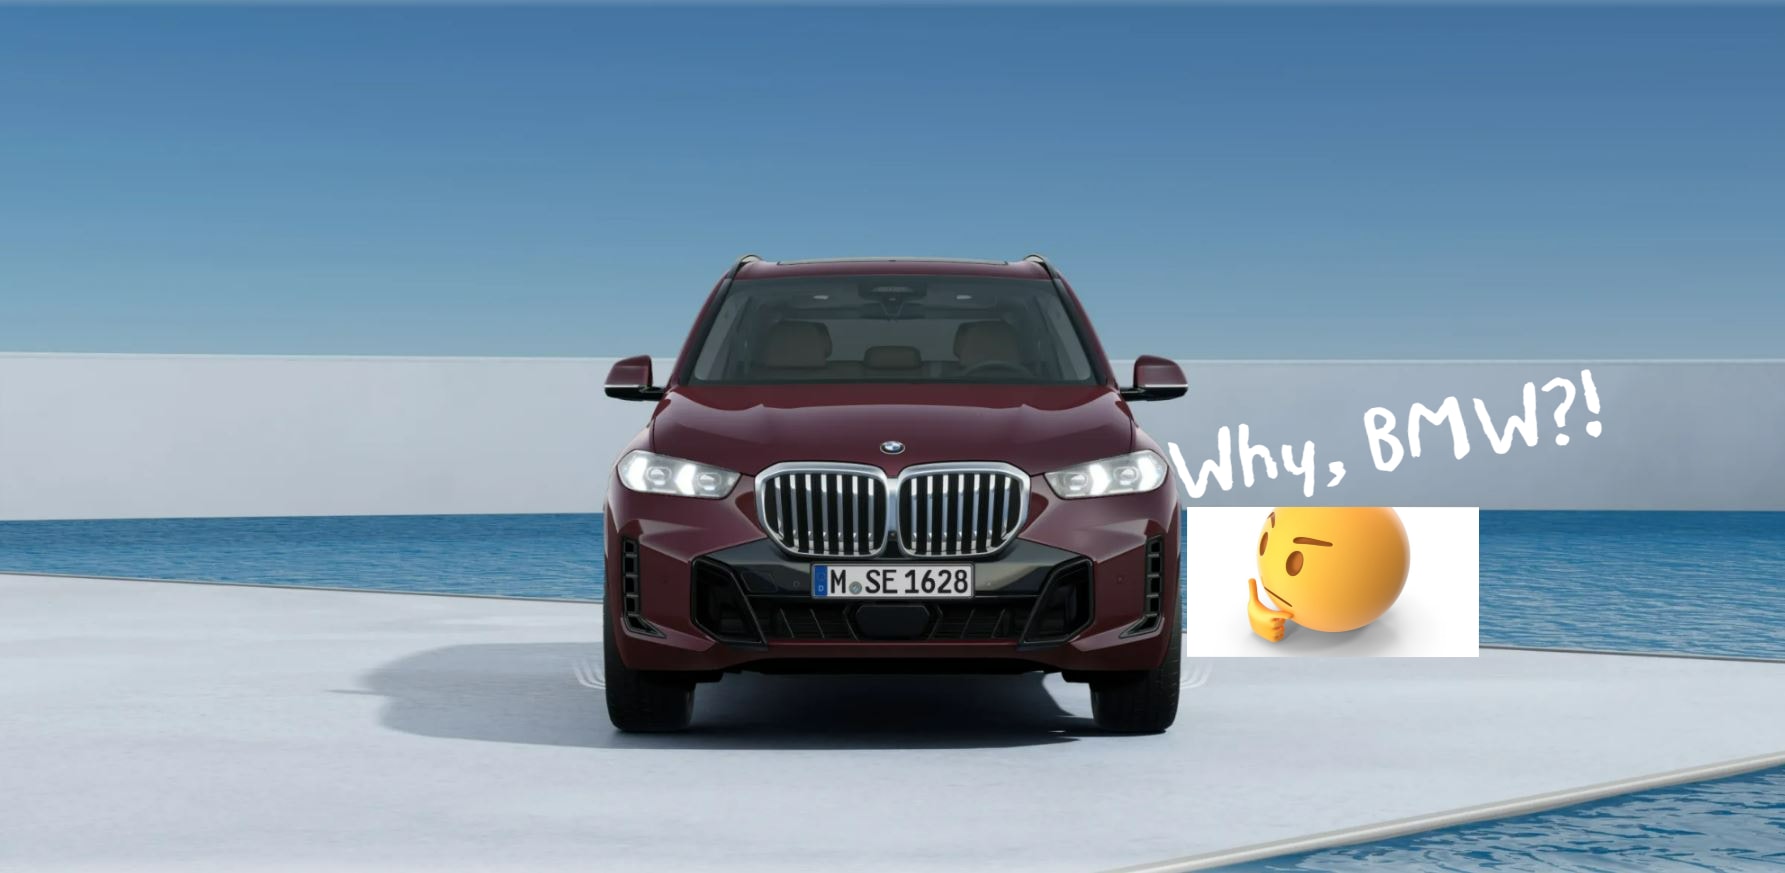 Build your own BMW X5 Sport Utility Vehicle